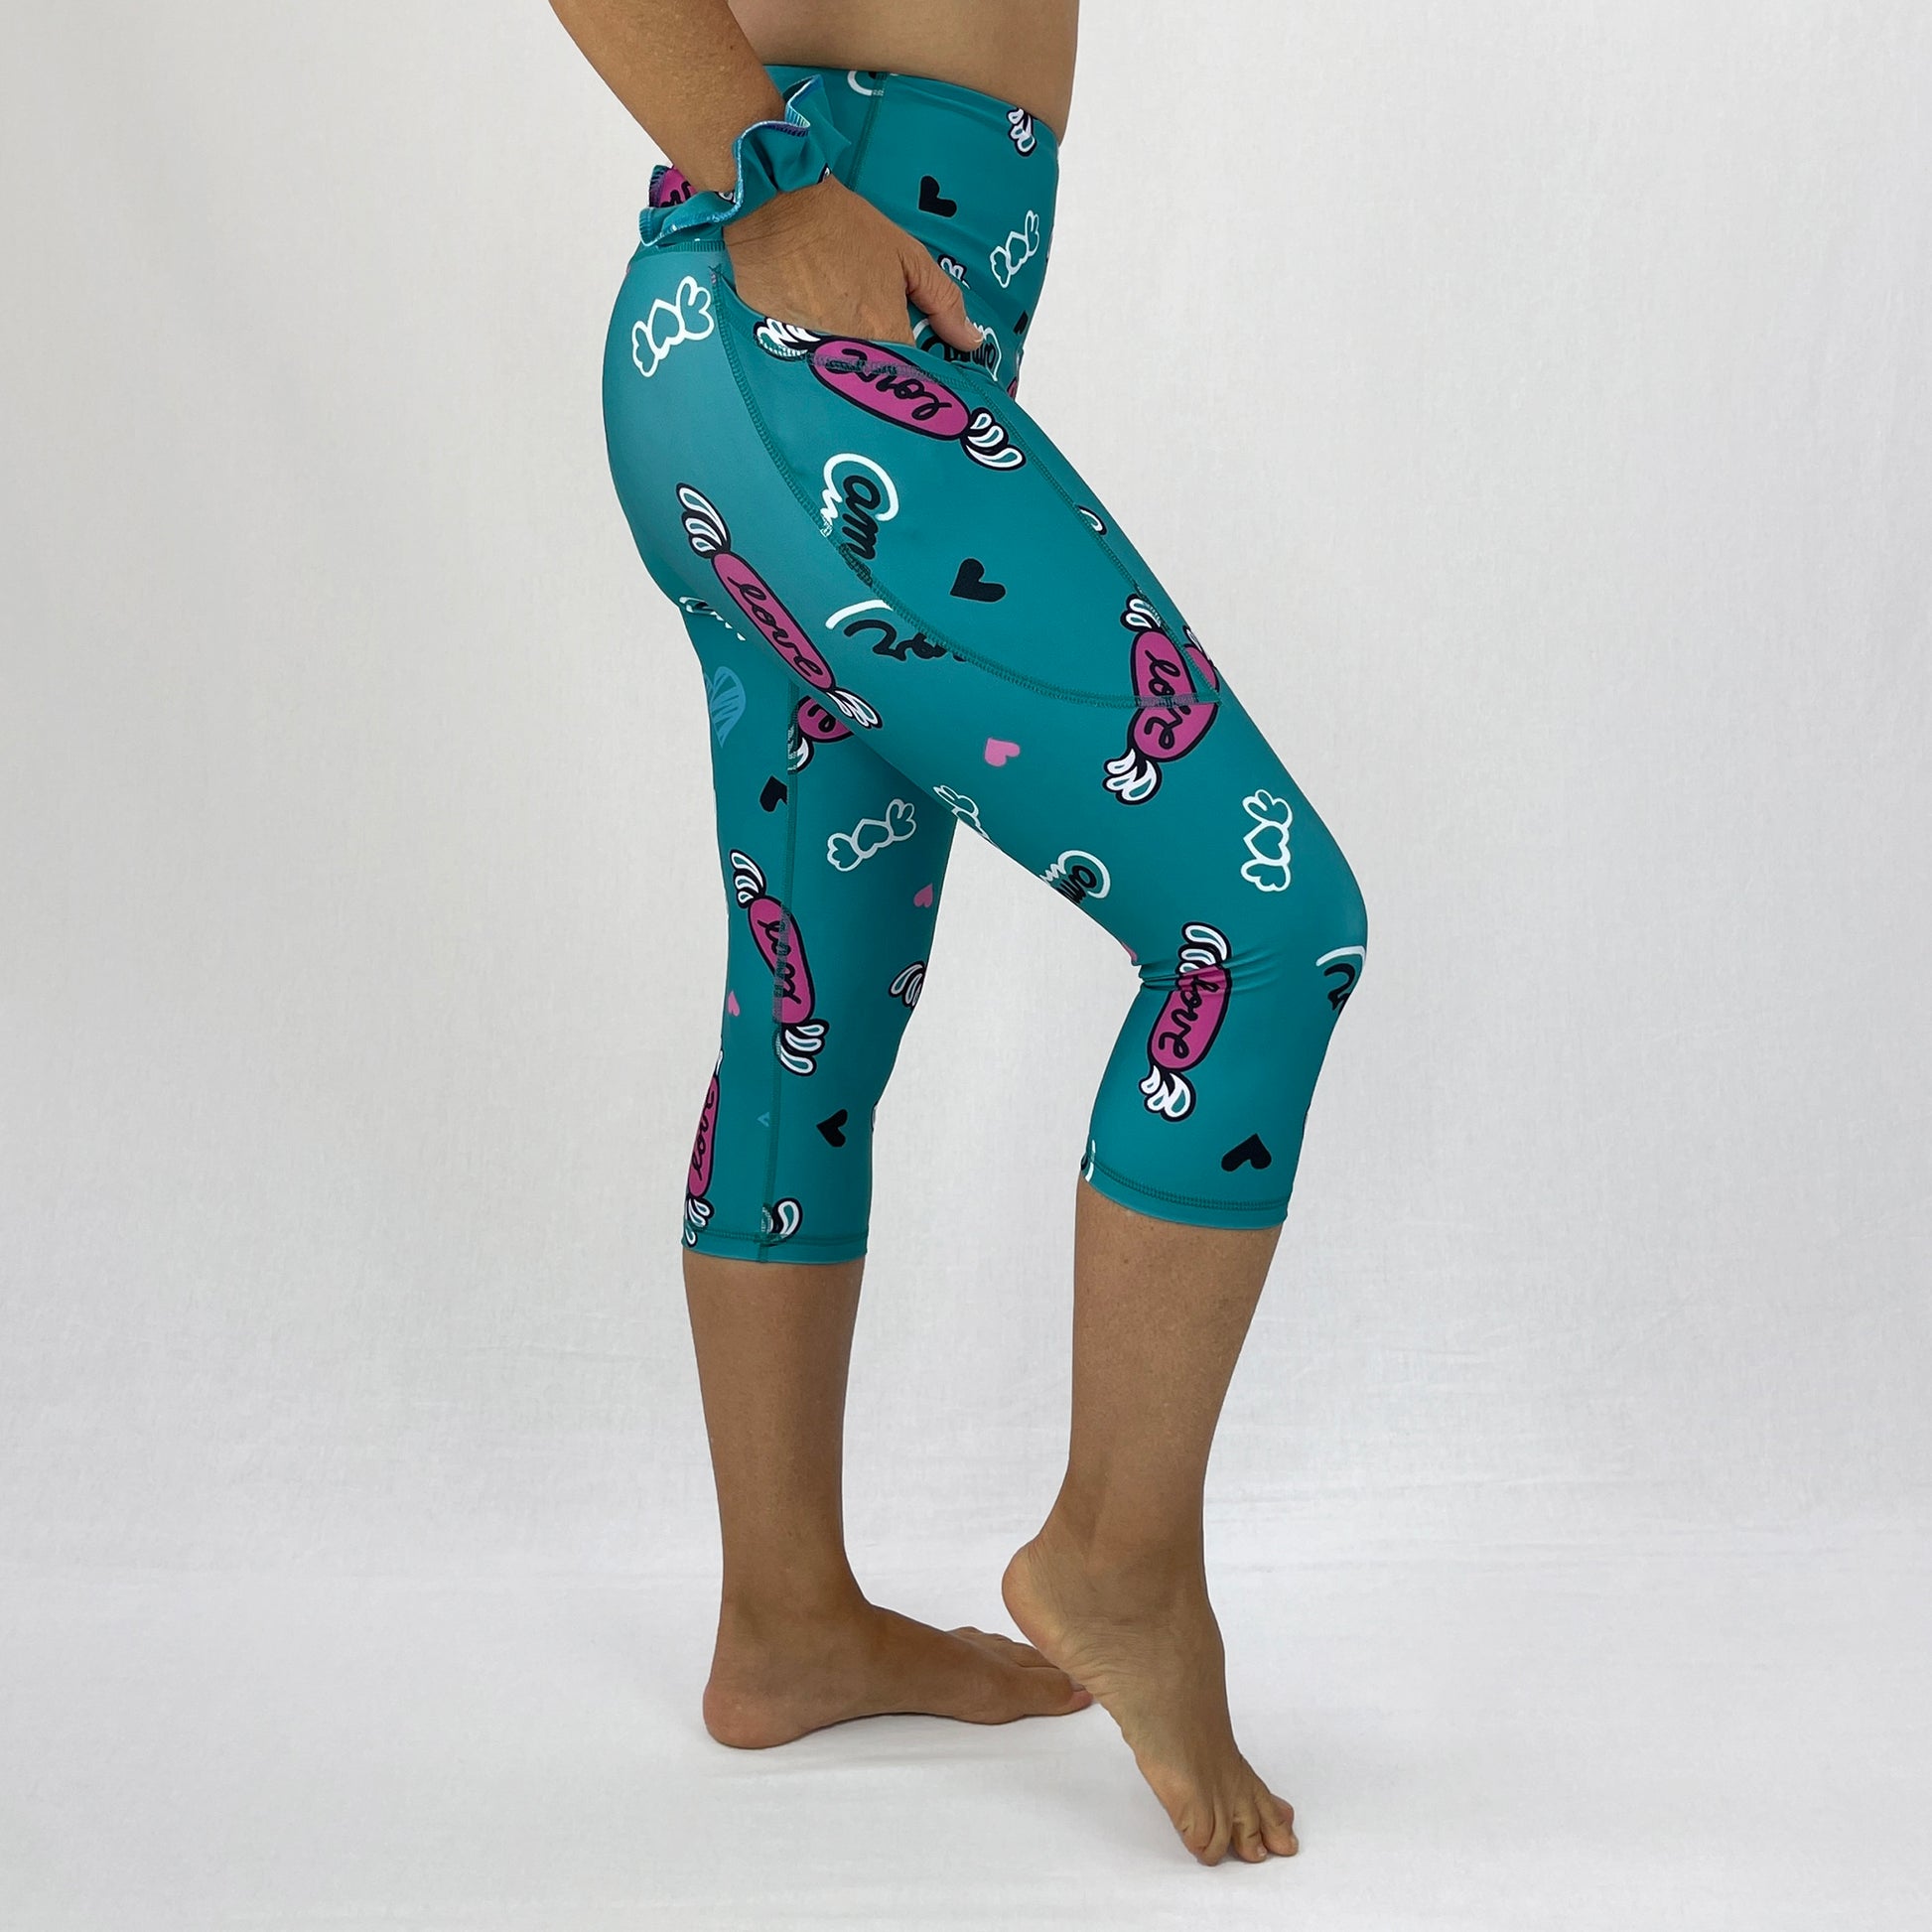 Ethical High Waisted 3/4 length Leggings Oda in Love by Monique Baqués side pocket